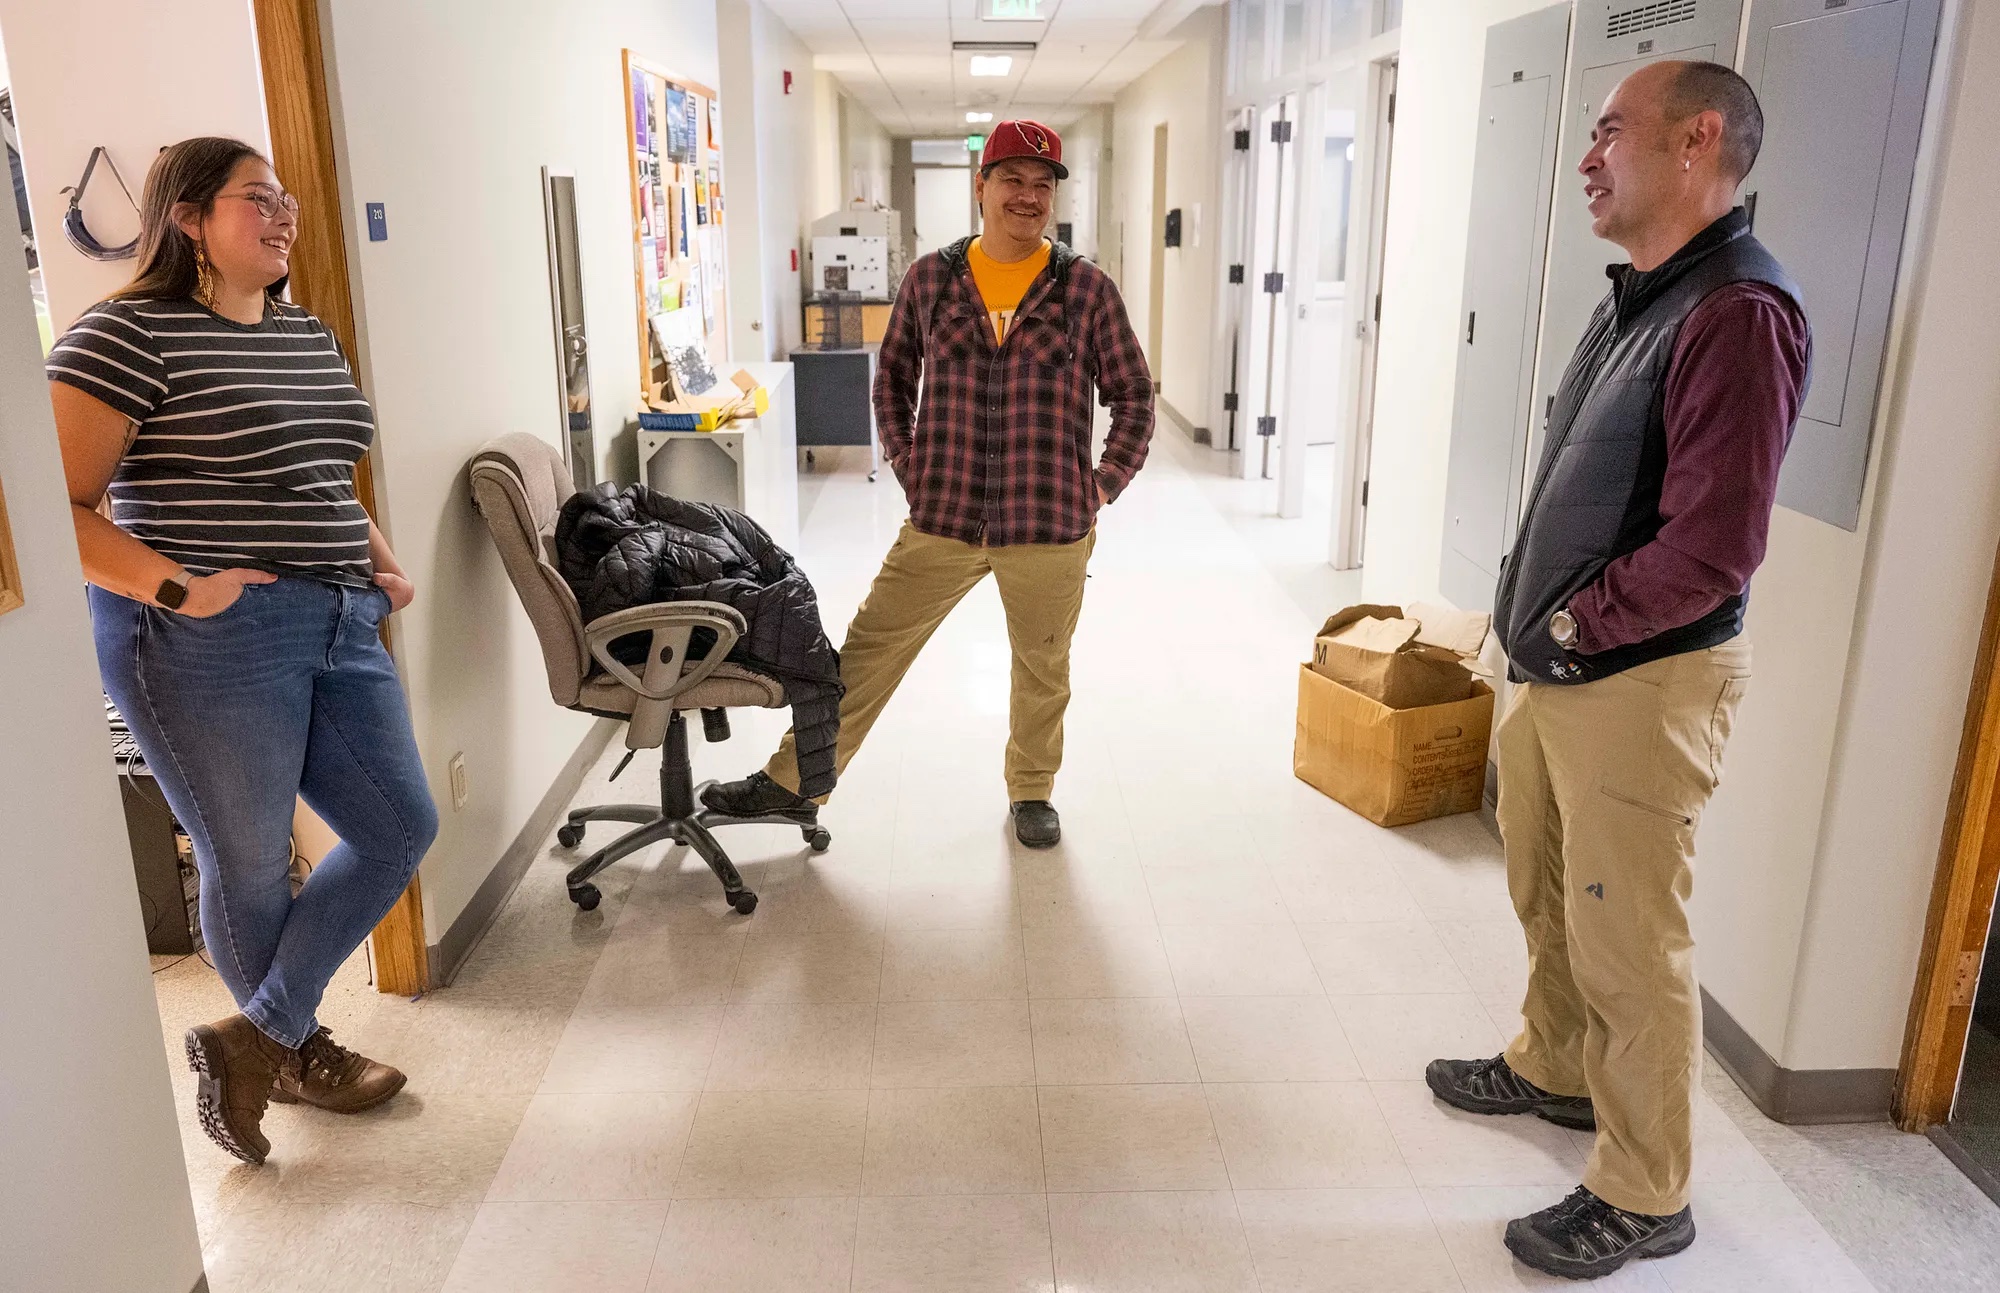 Paske (left) and Thomas chat with Stephan Chase (center), the associate director of Montana American Indians in Math and Science (MT AIMS), which hosts summer camps designed to kindle an interest in STEM careers for middle and high school Native students.